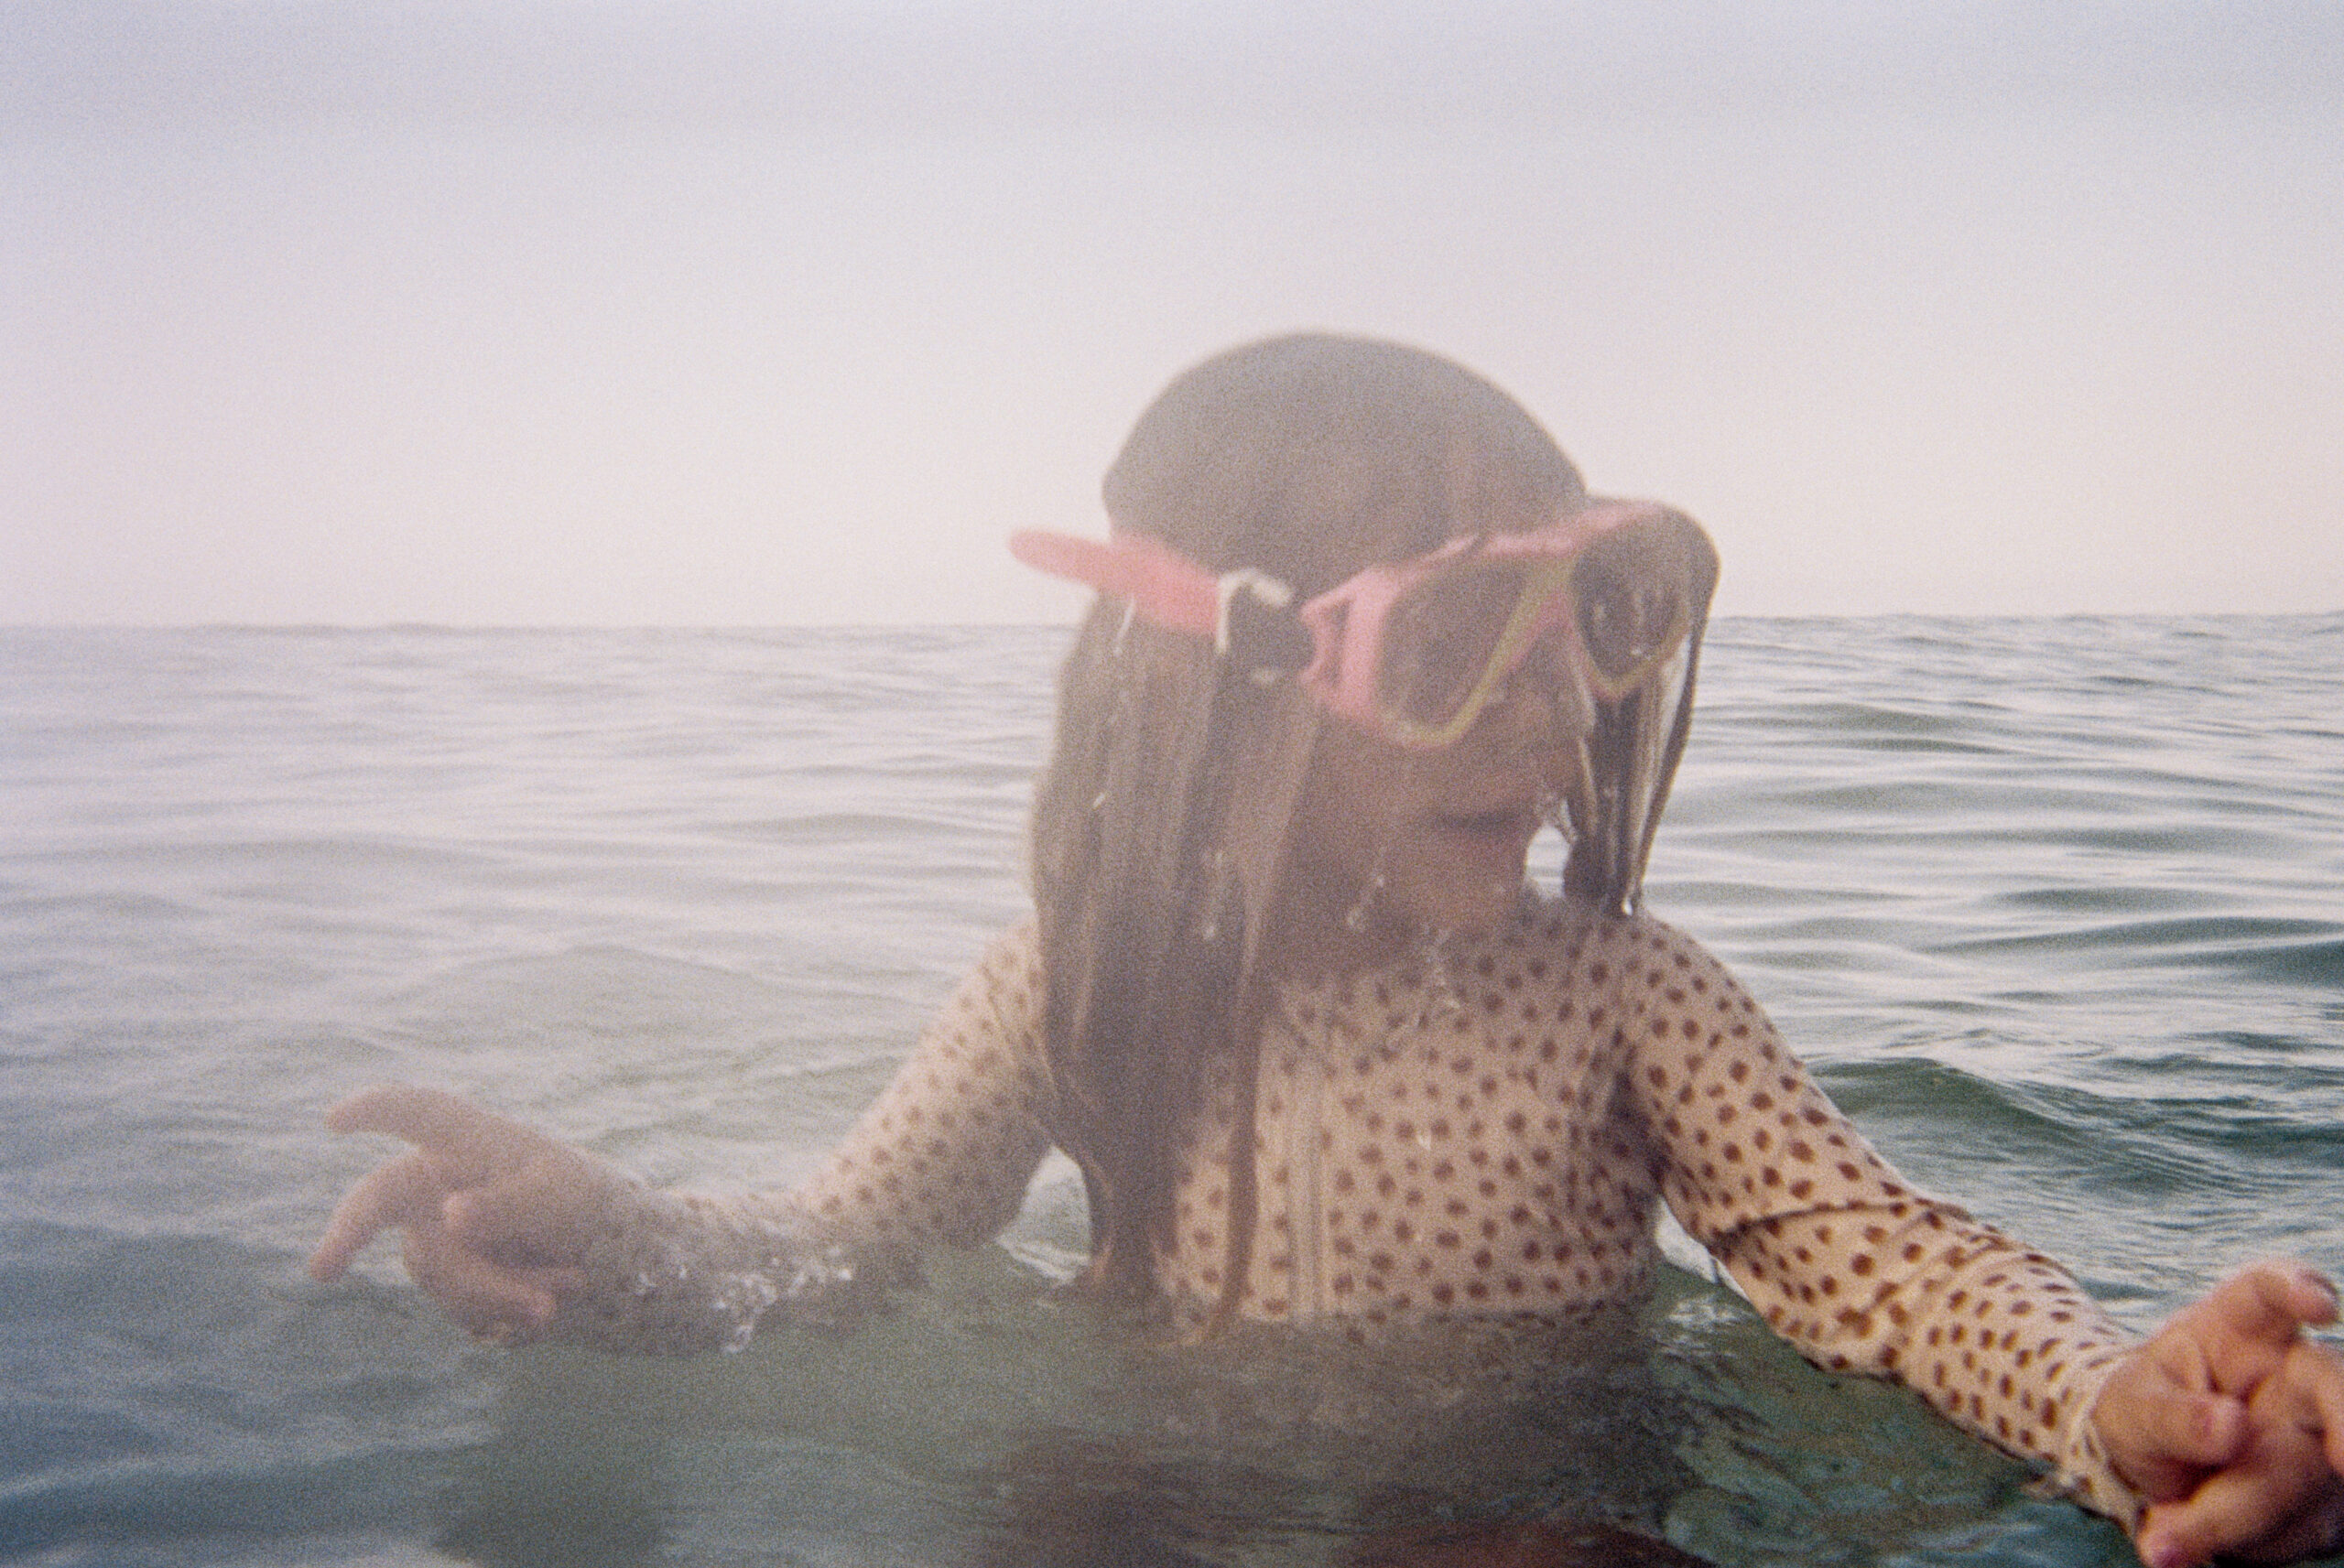 A little girl wearing pink snorkles rises up from the water while swimming in 30A Florida.